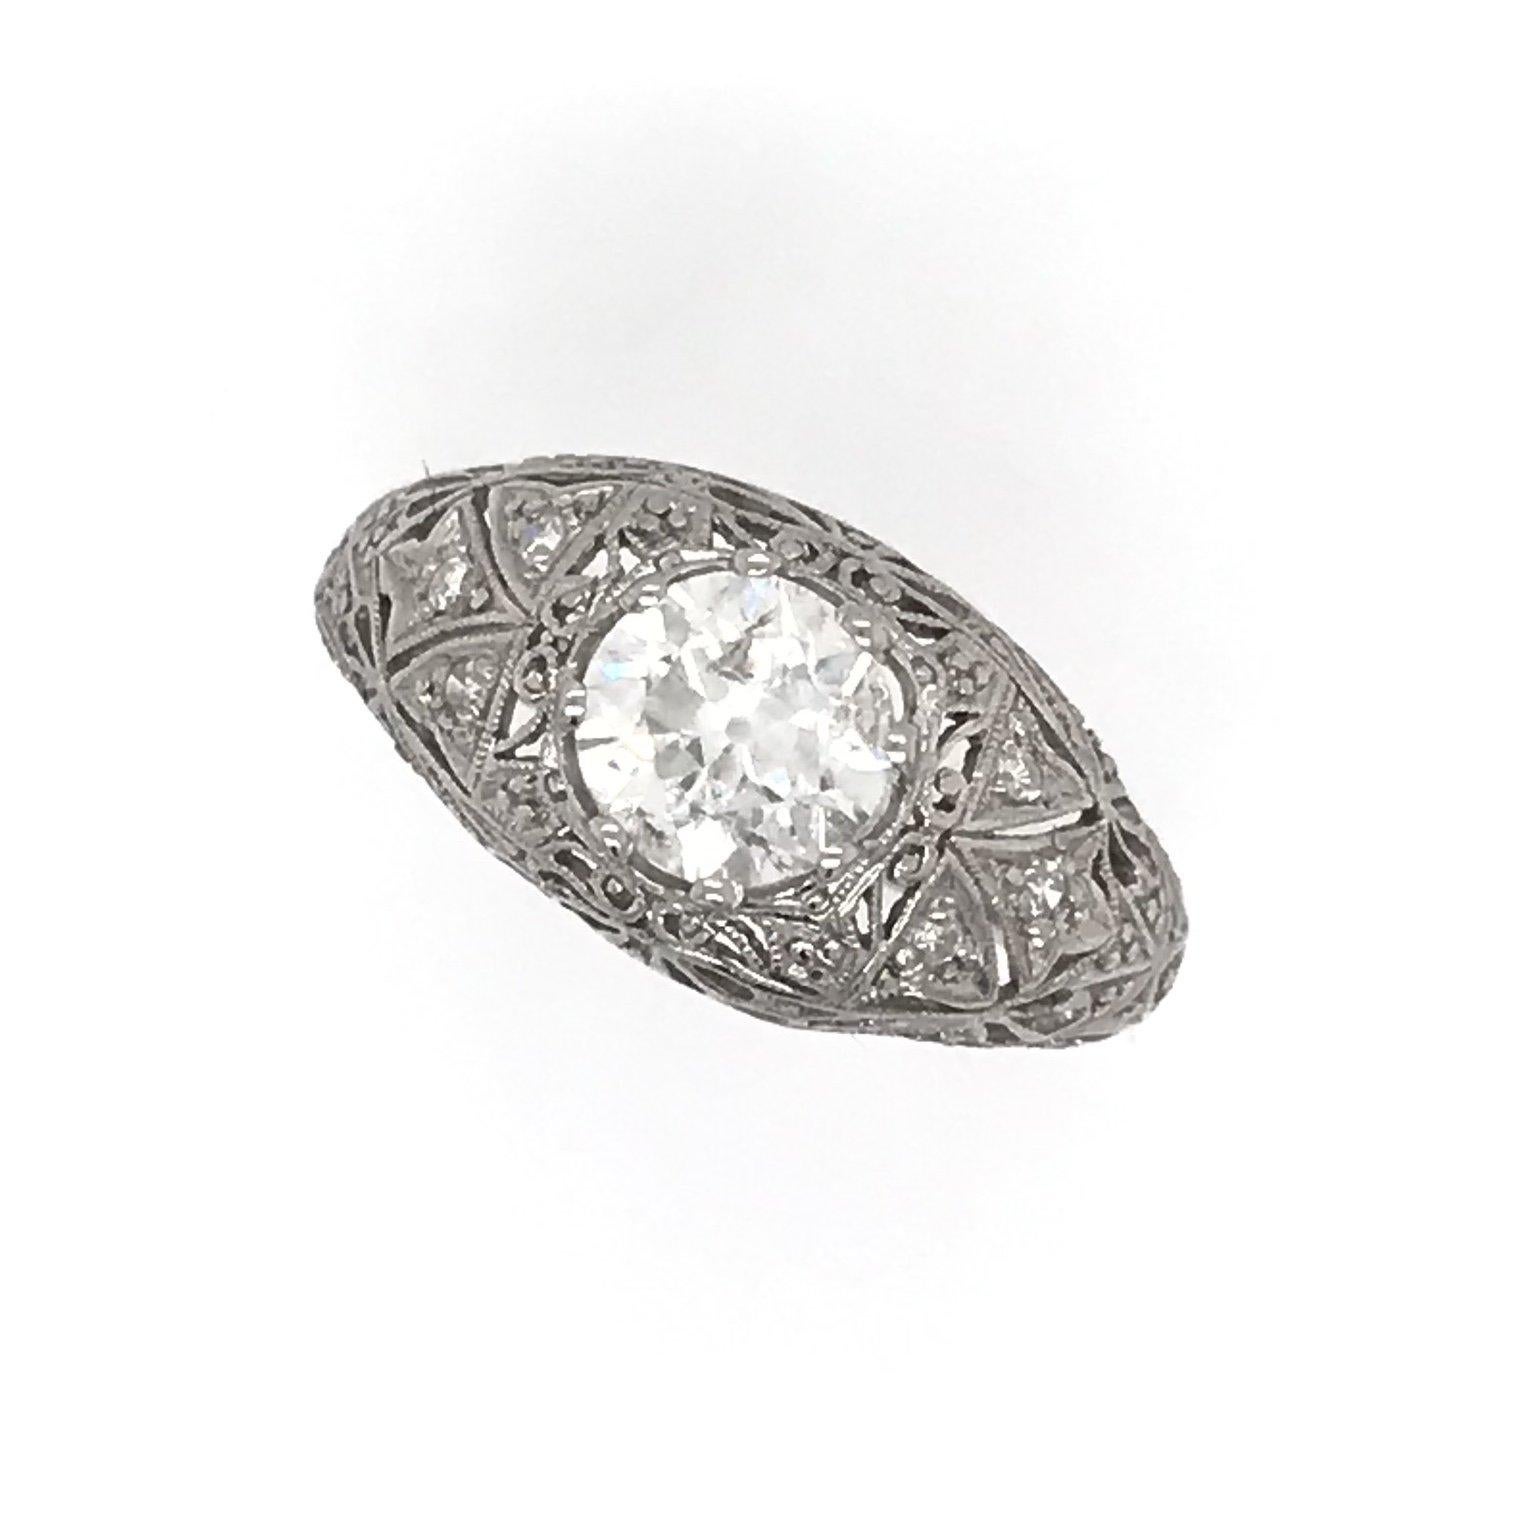 This antique piece was handcrafted sometime during the early twentieth century ( 1910-1940 ). At some point in time the platinum setting was completely re-shanked with a wider comfort fit style band. The center diamond measures approximately 1.15